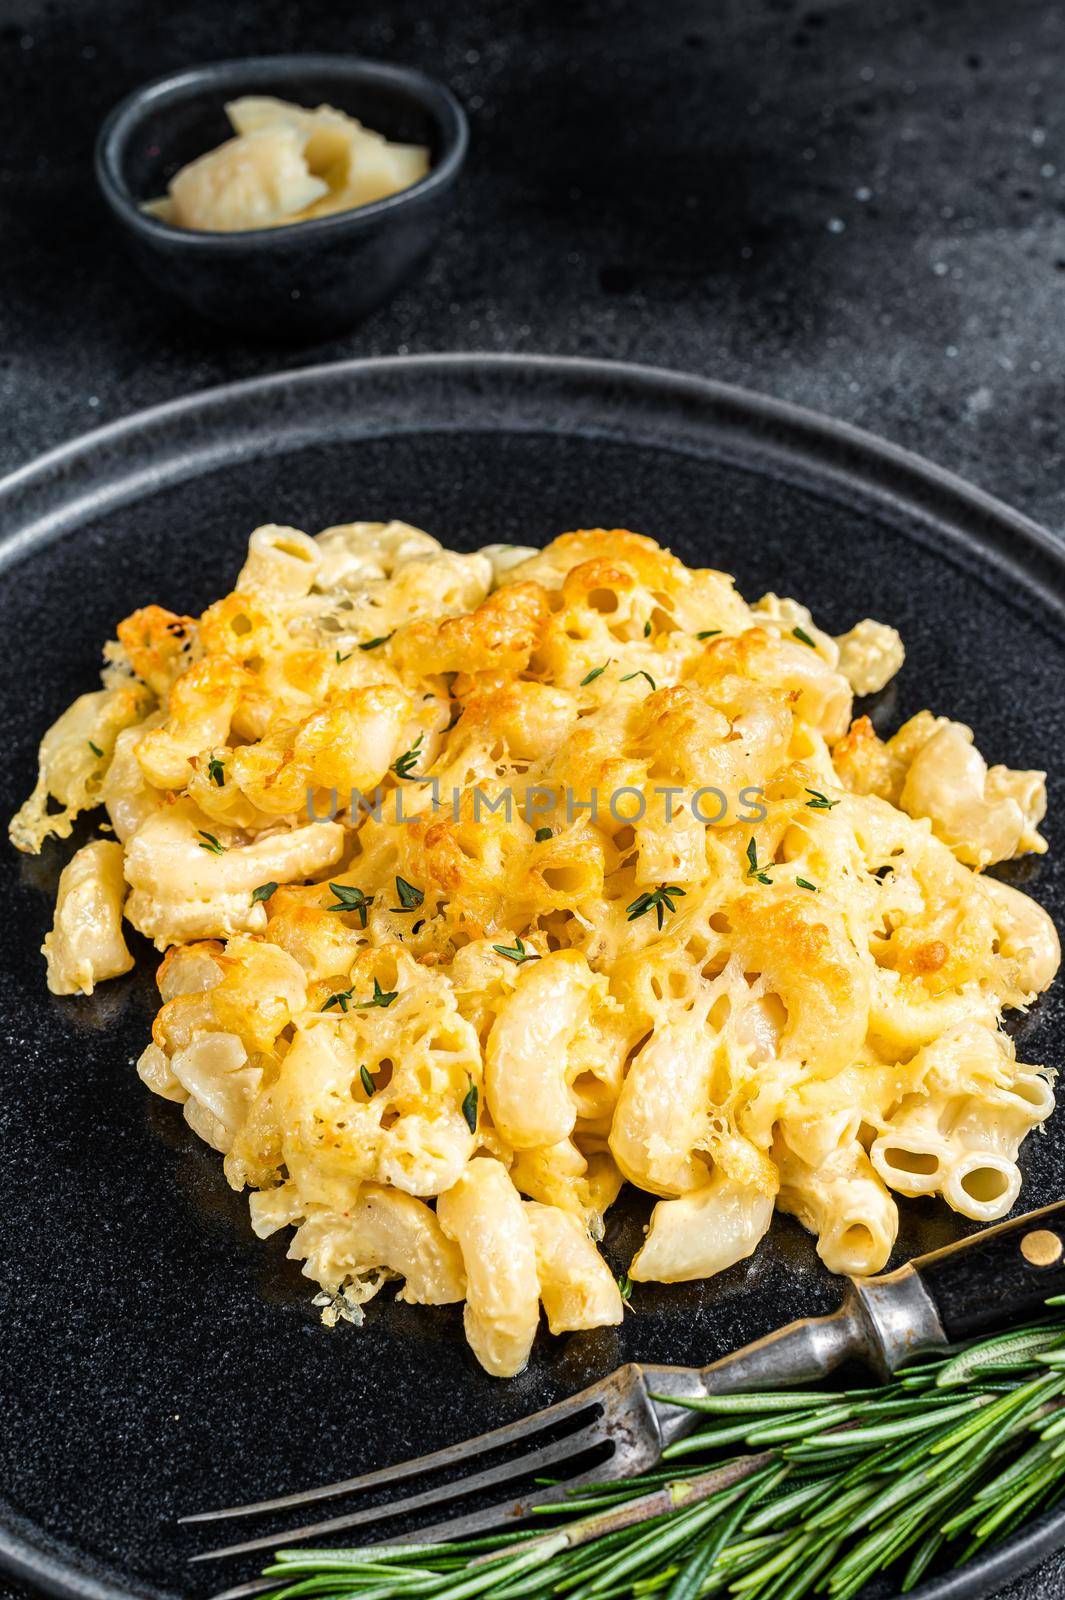 Baked Macaroni Mac and cheese American dish with Cheddar cheese sauce. Black background. Top view.